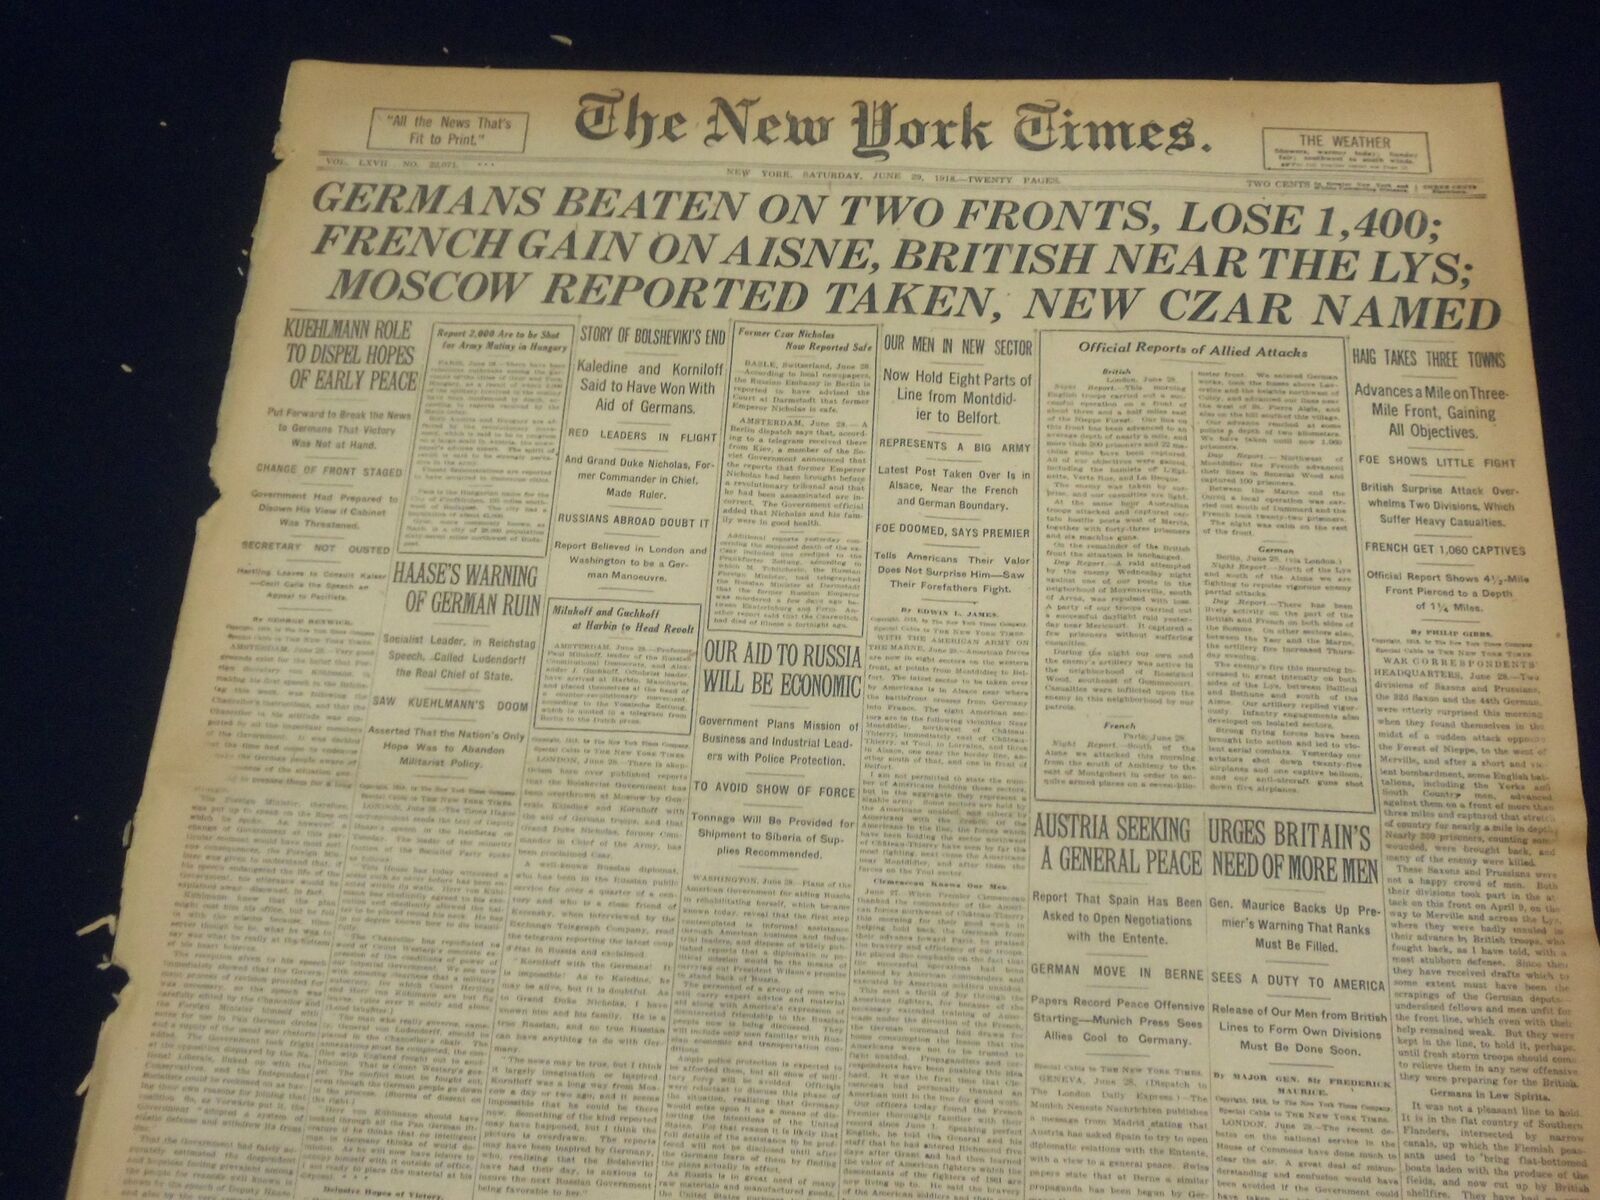 1918 JUNE 29 NEW YORK TIMES - GERMANS BEATEN ON TWO FRONTS - NT 9091